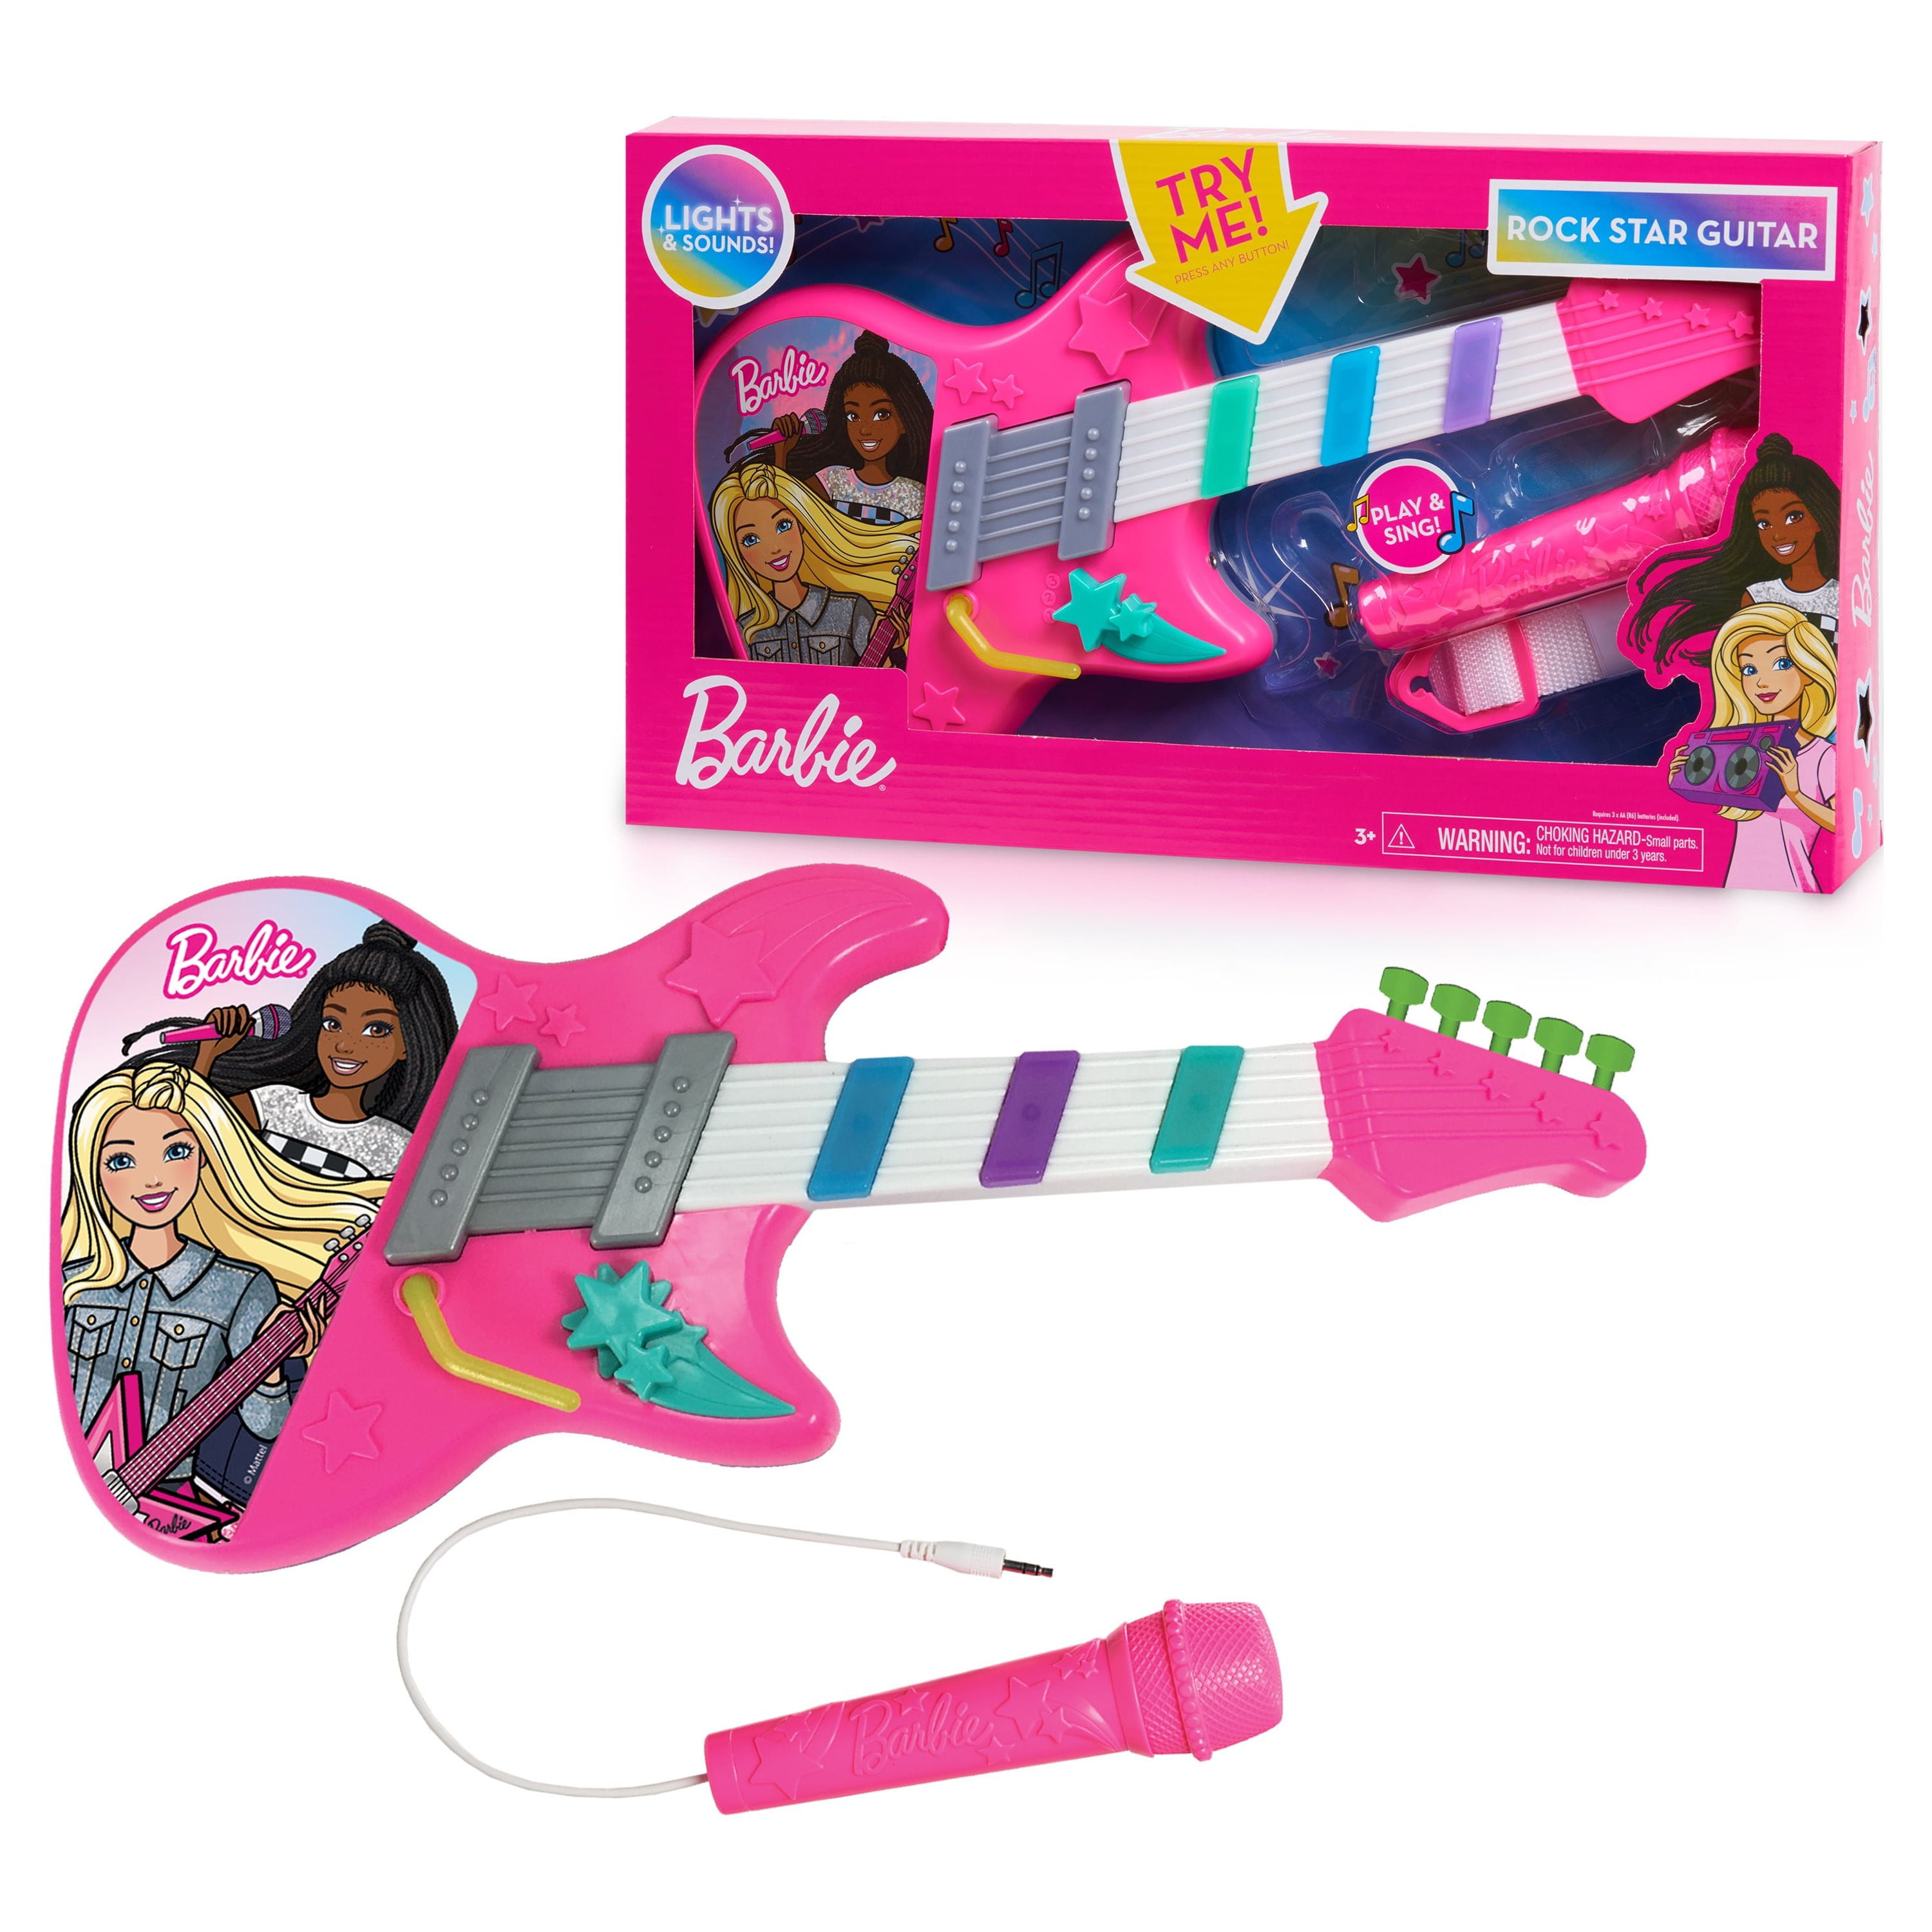 Barbie Rock Star Guitar, Interactive Electronic Toy Guitar with Lights,  Sounds, and Microphone, Kids Toys for Ages 3 Up, Gifts and Presents